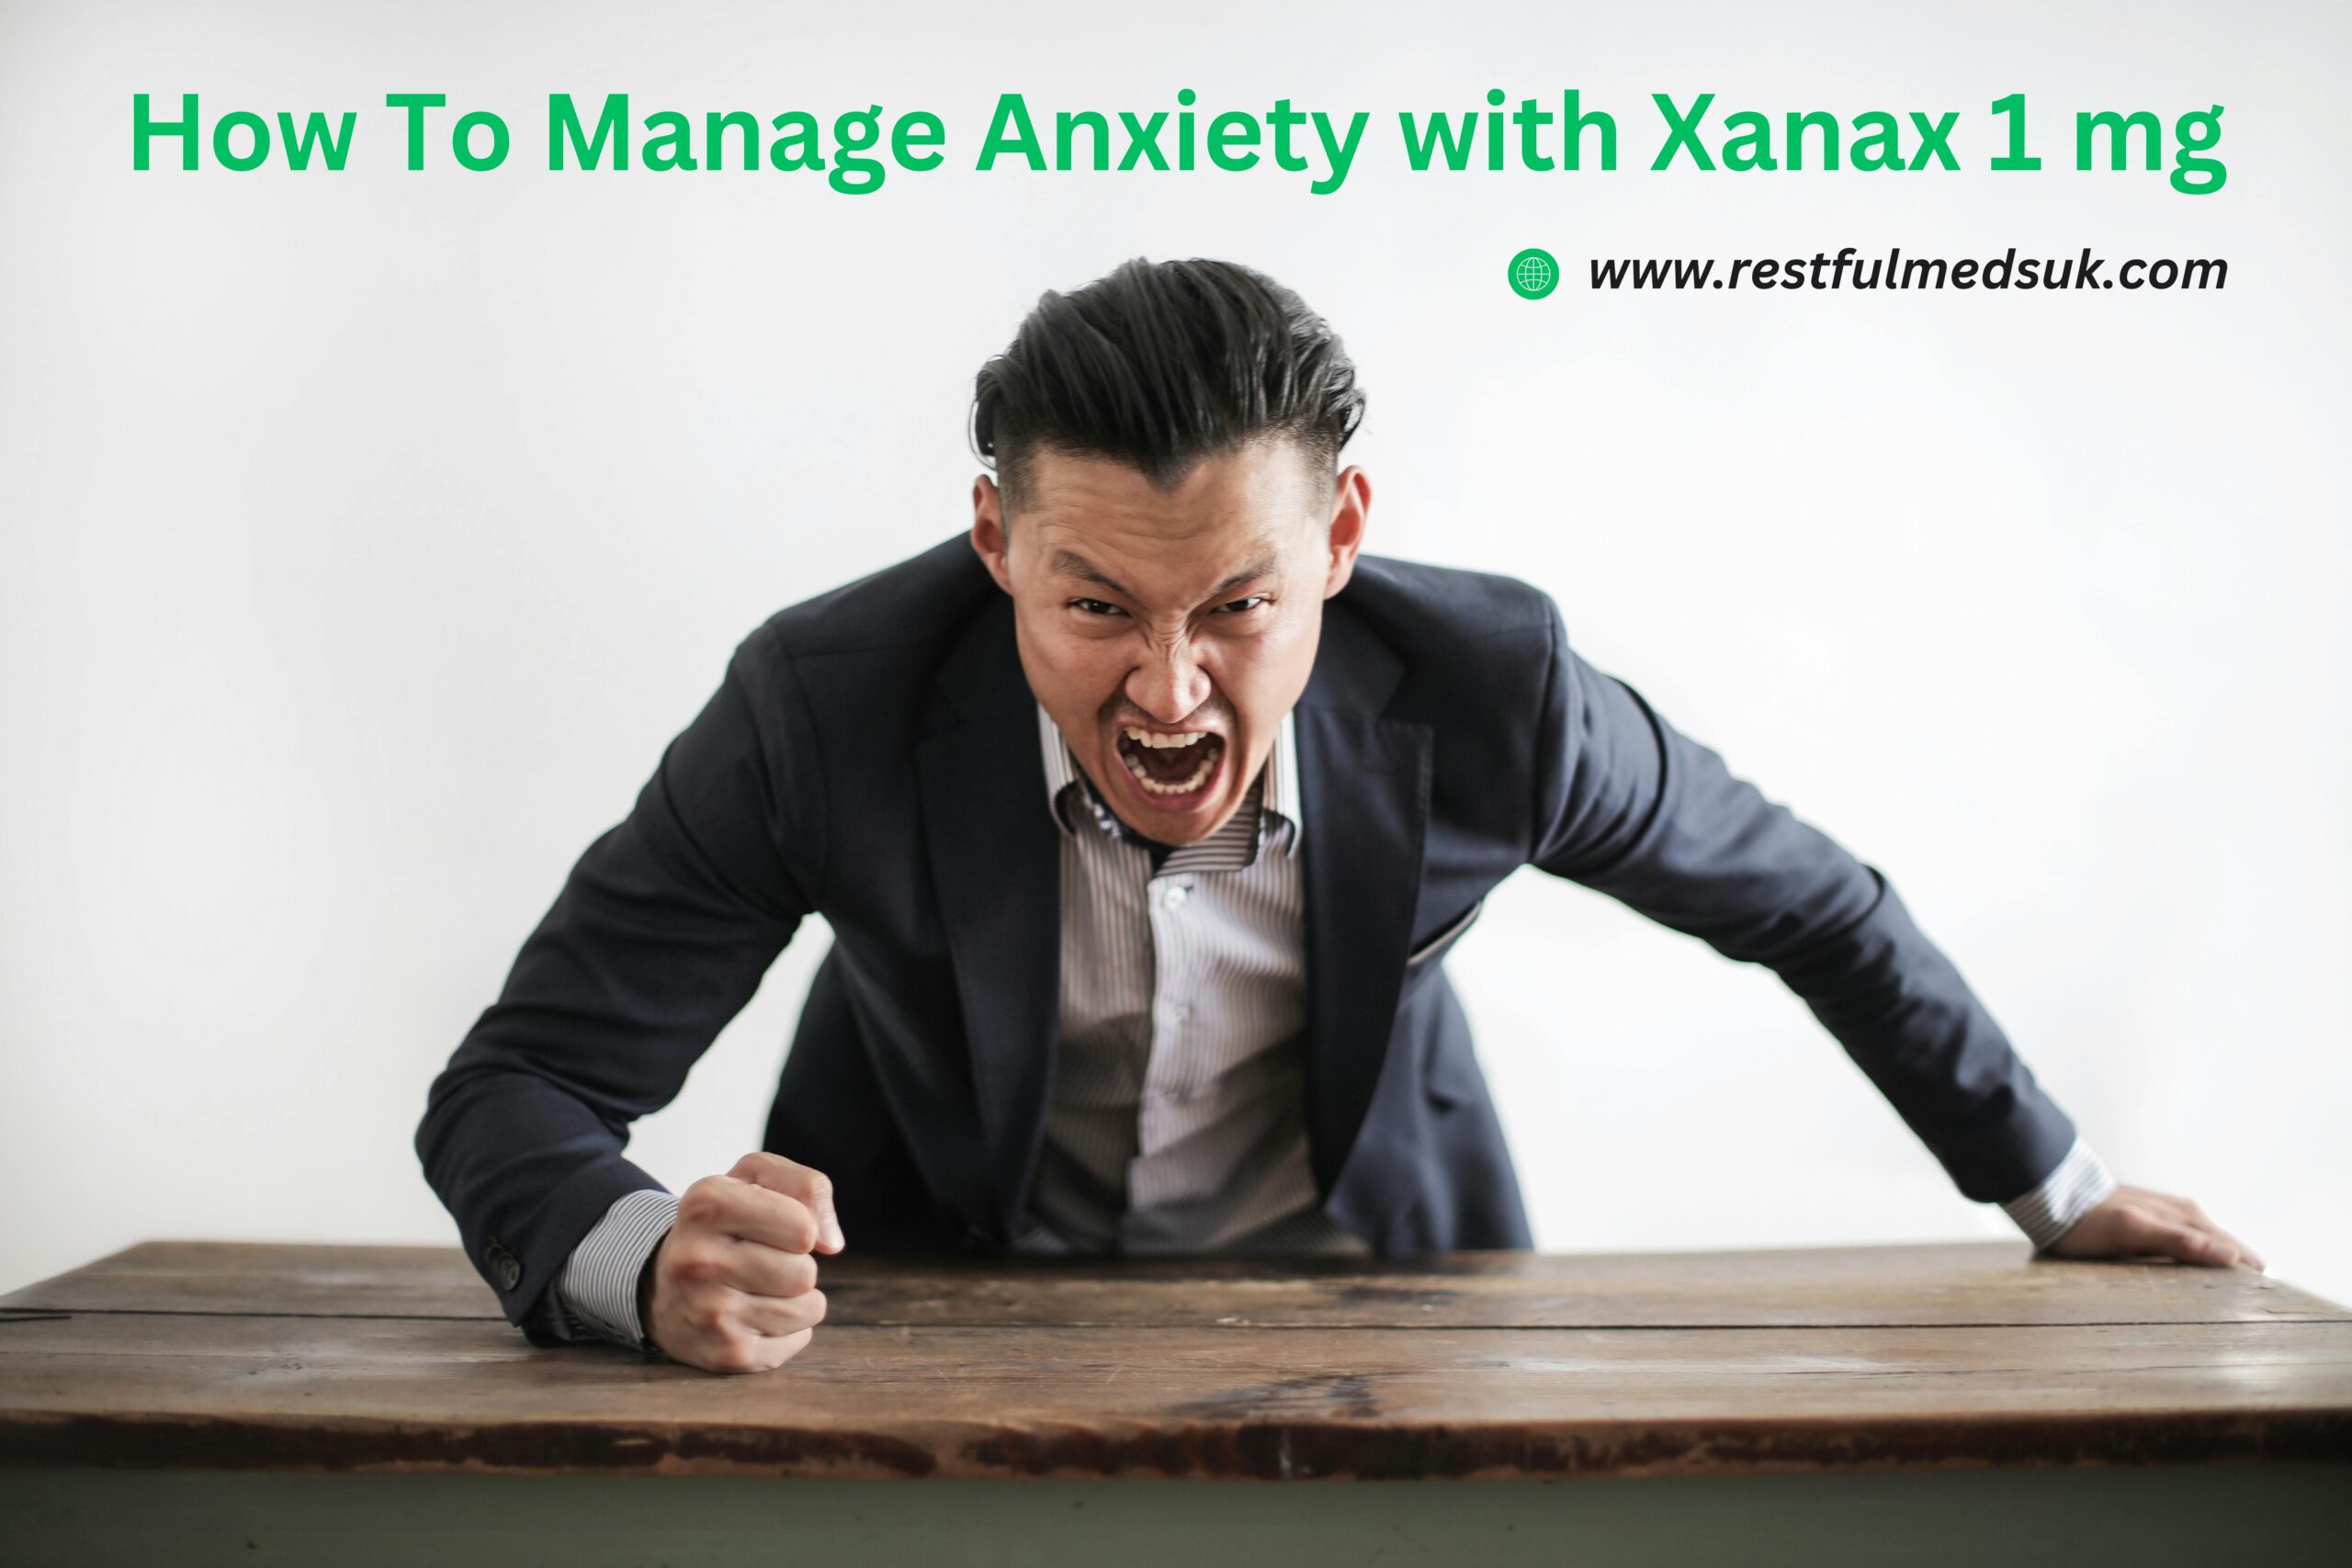 How To Manage Anxiety with Xanax 1 mg & 2 mg: A Comprehensive Tutorial